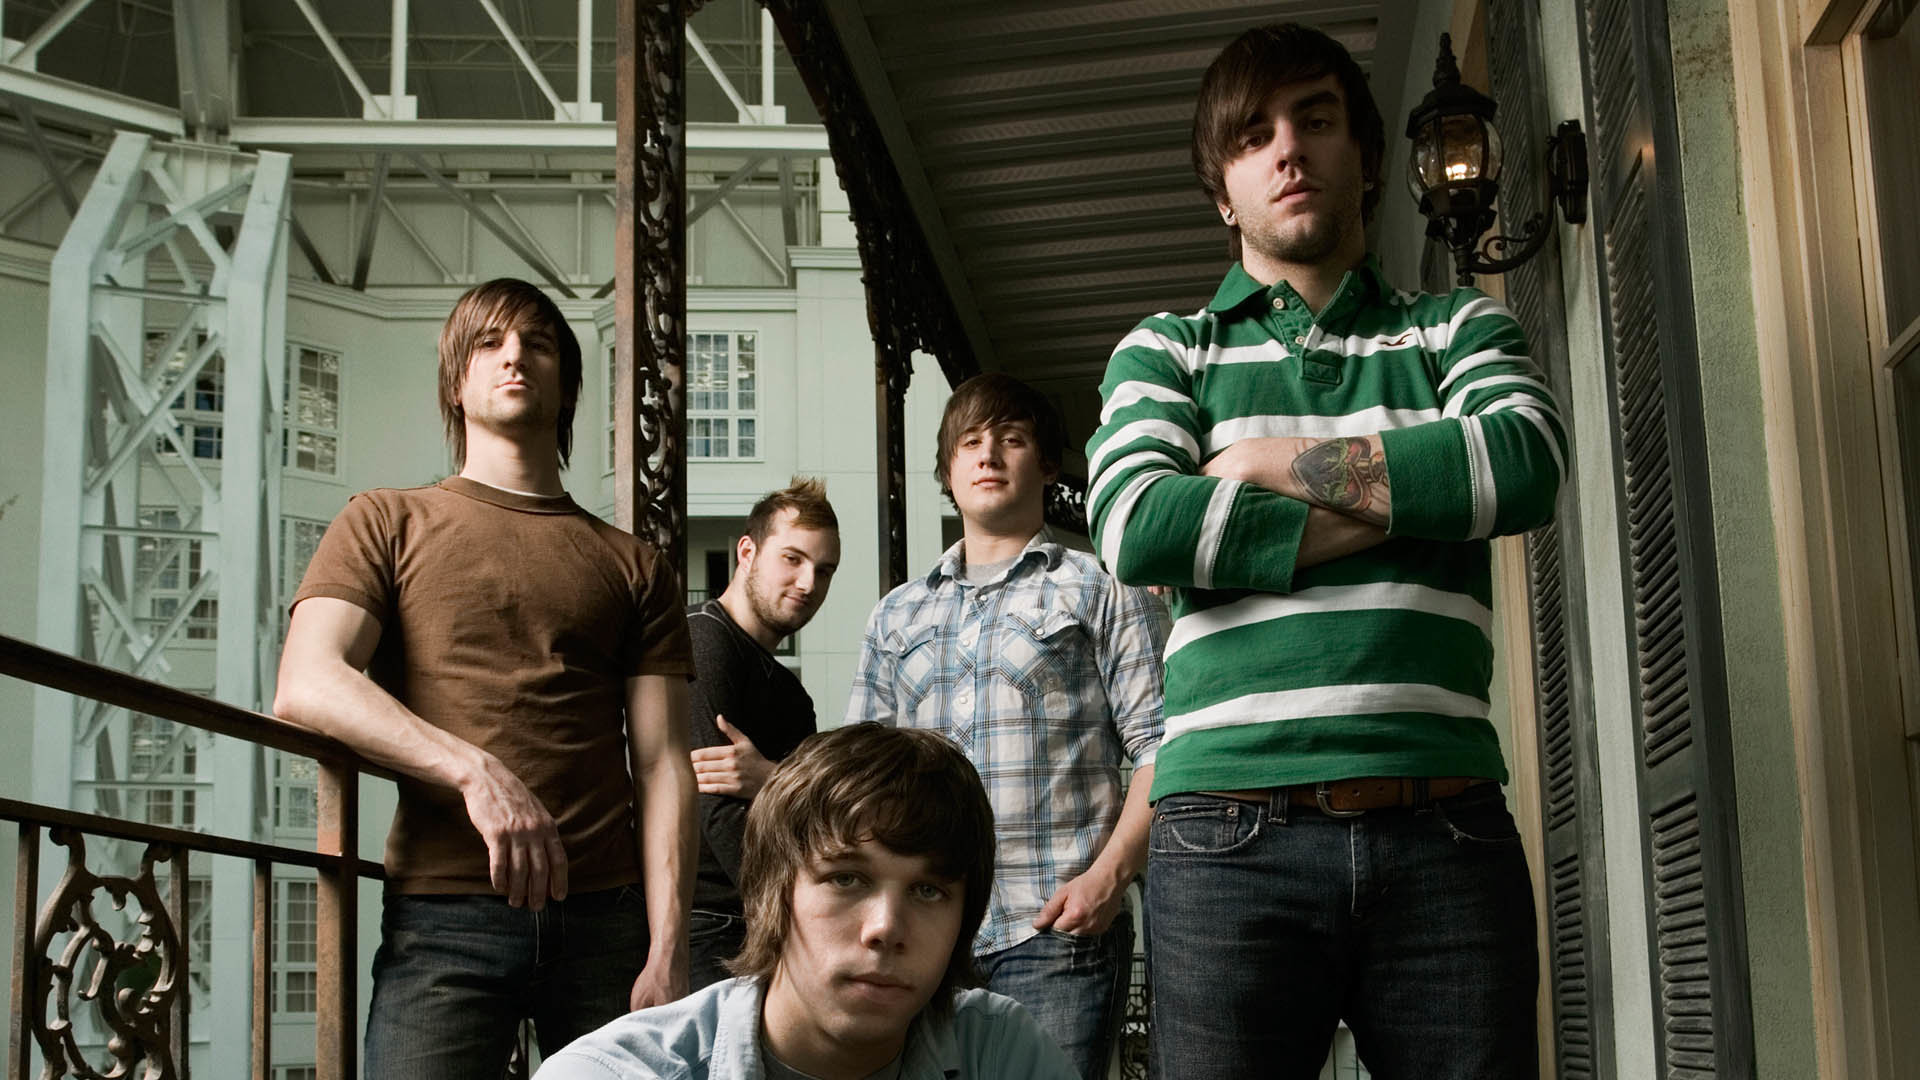 Download hd 1920x1080 August Burns Red PC background ID:455729 for free